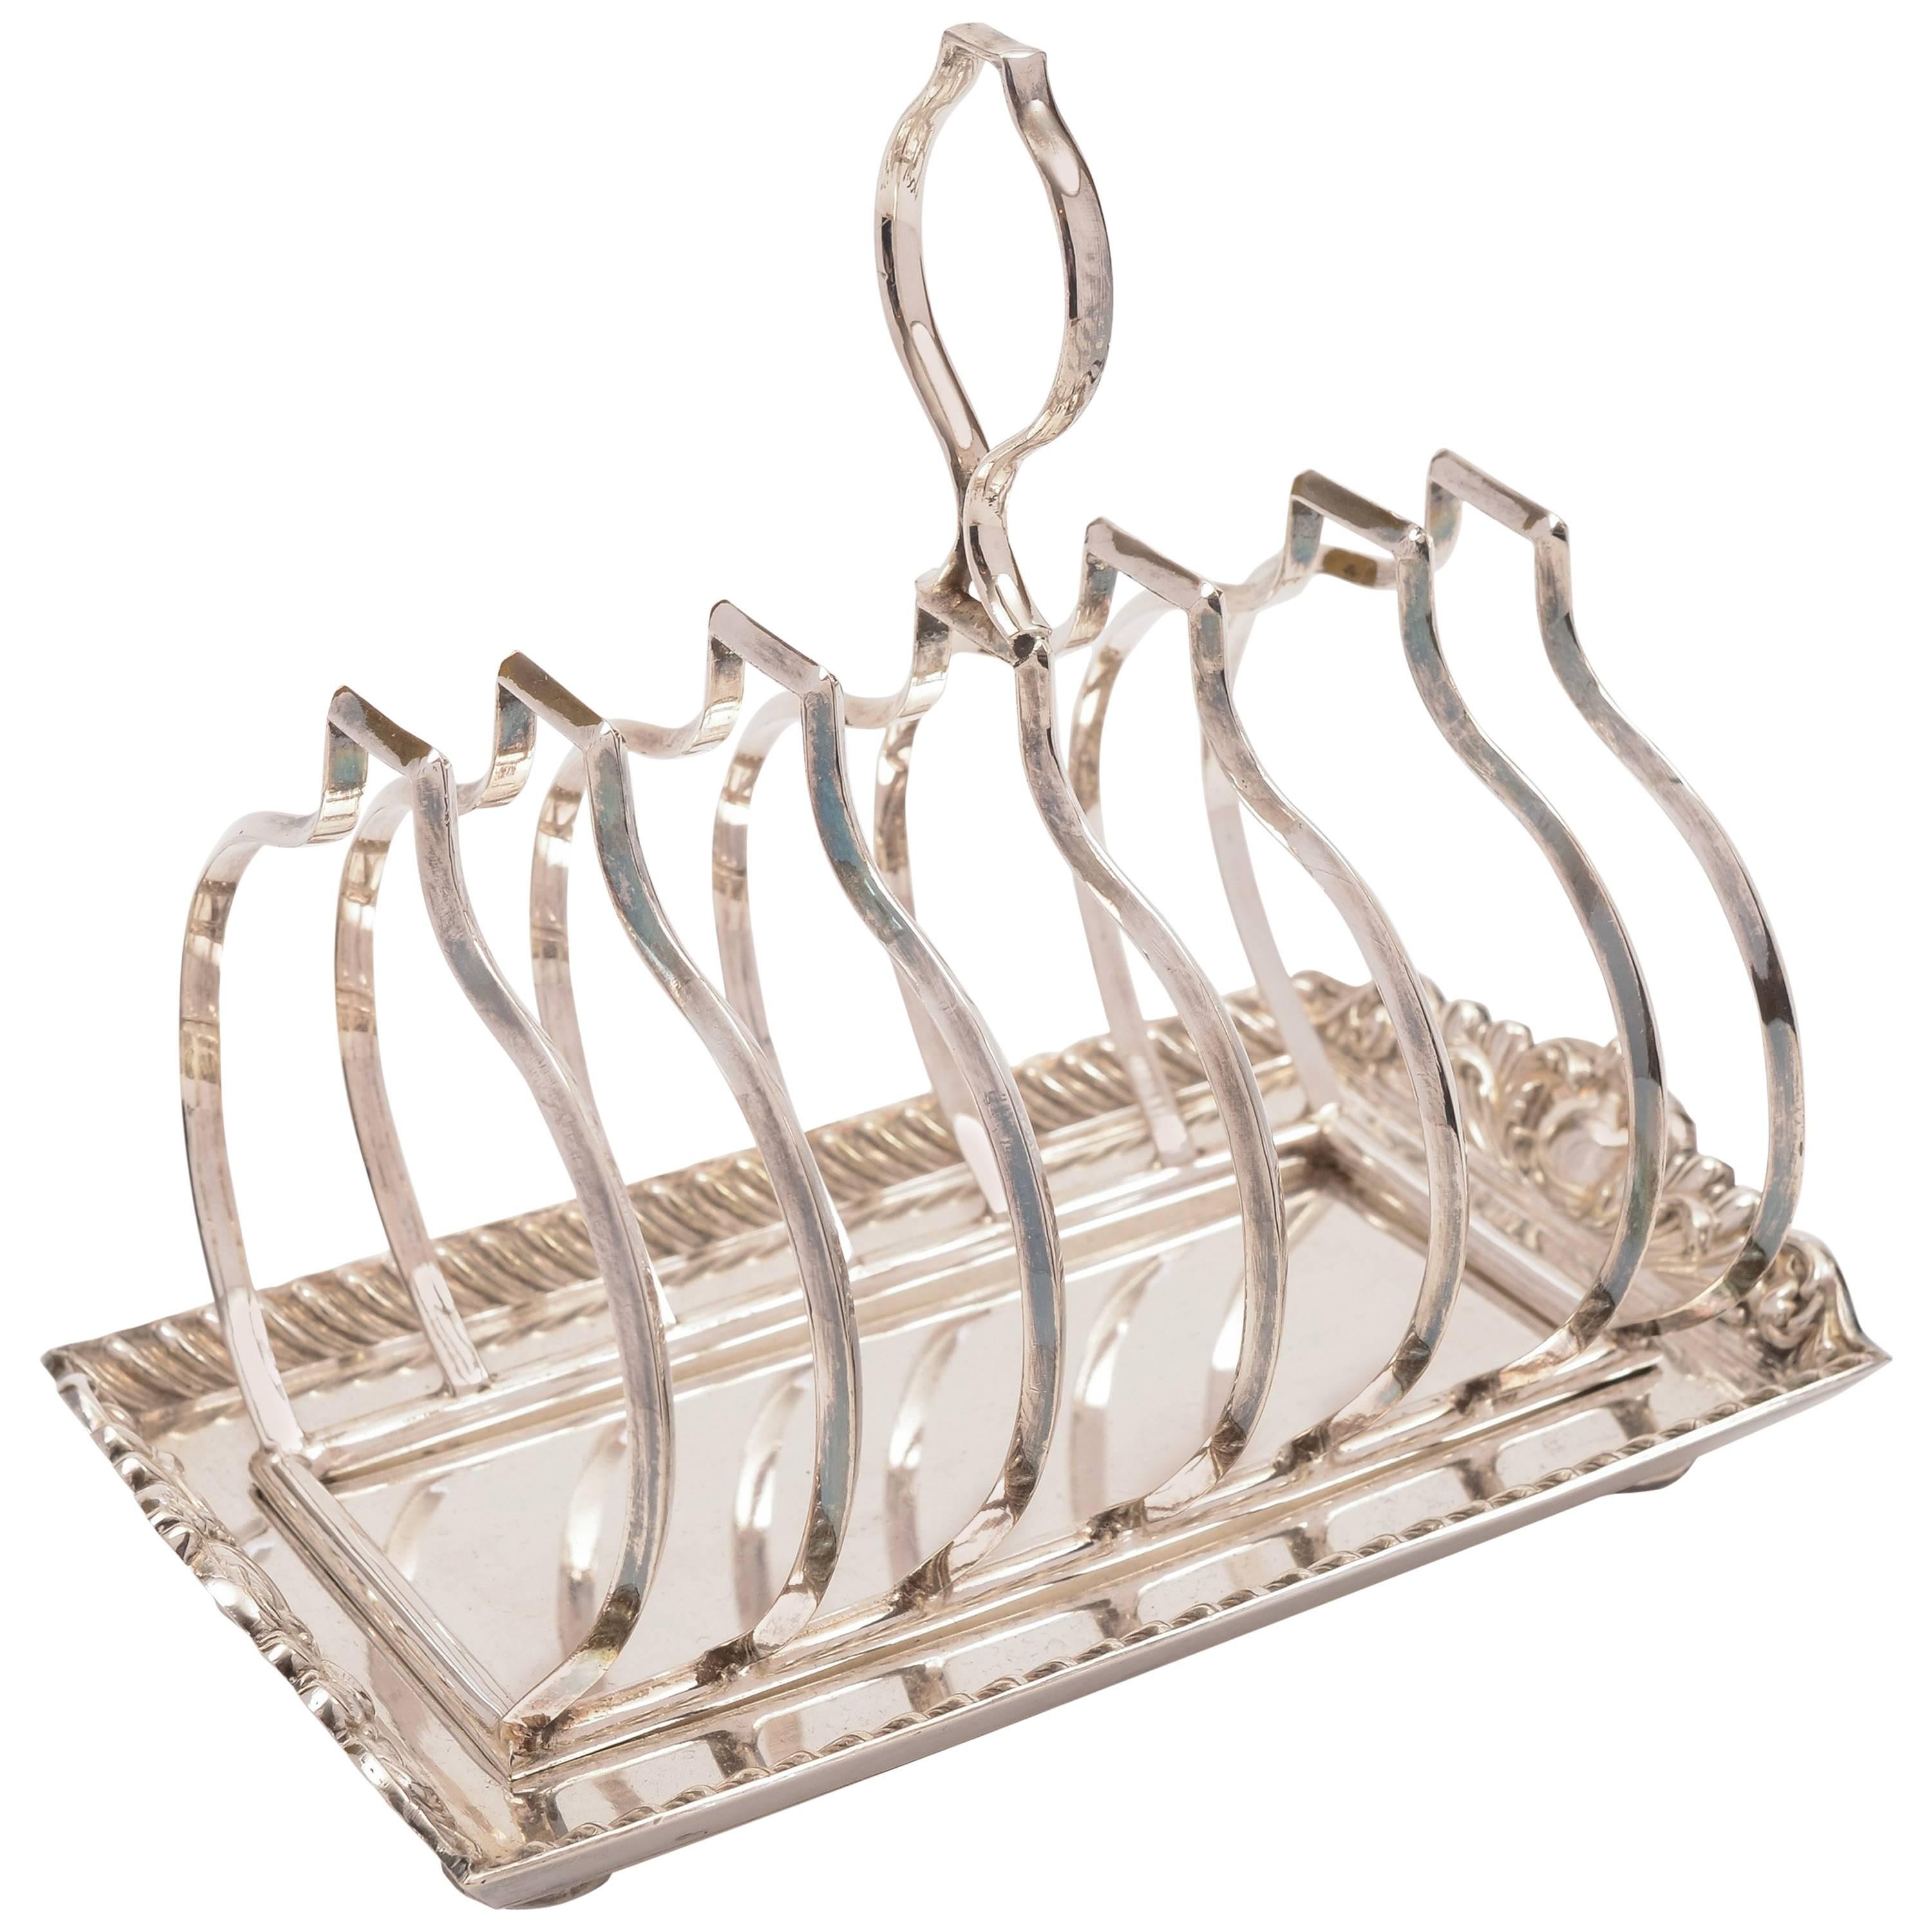 20th Century Edwardian Silver Plated Toast Rack